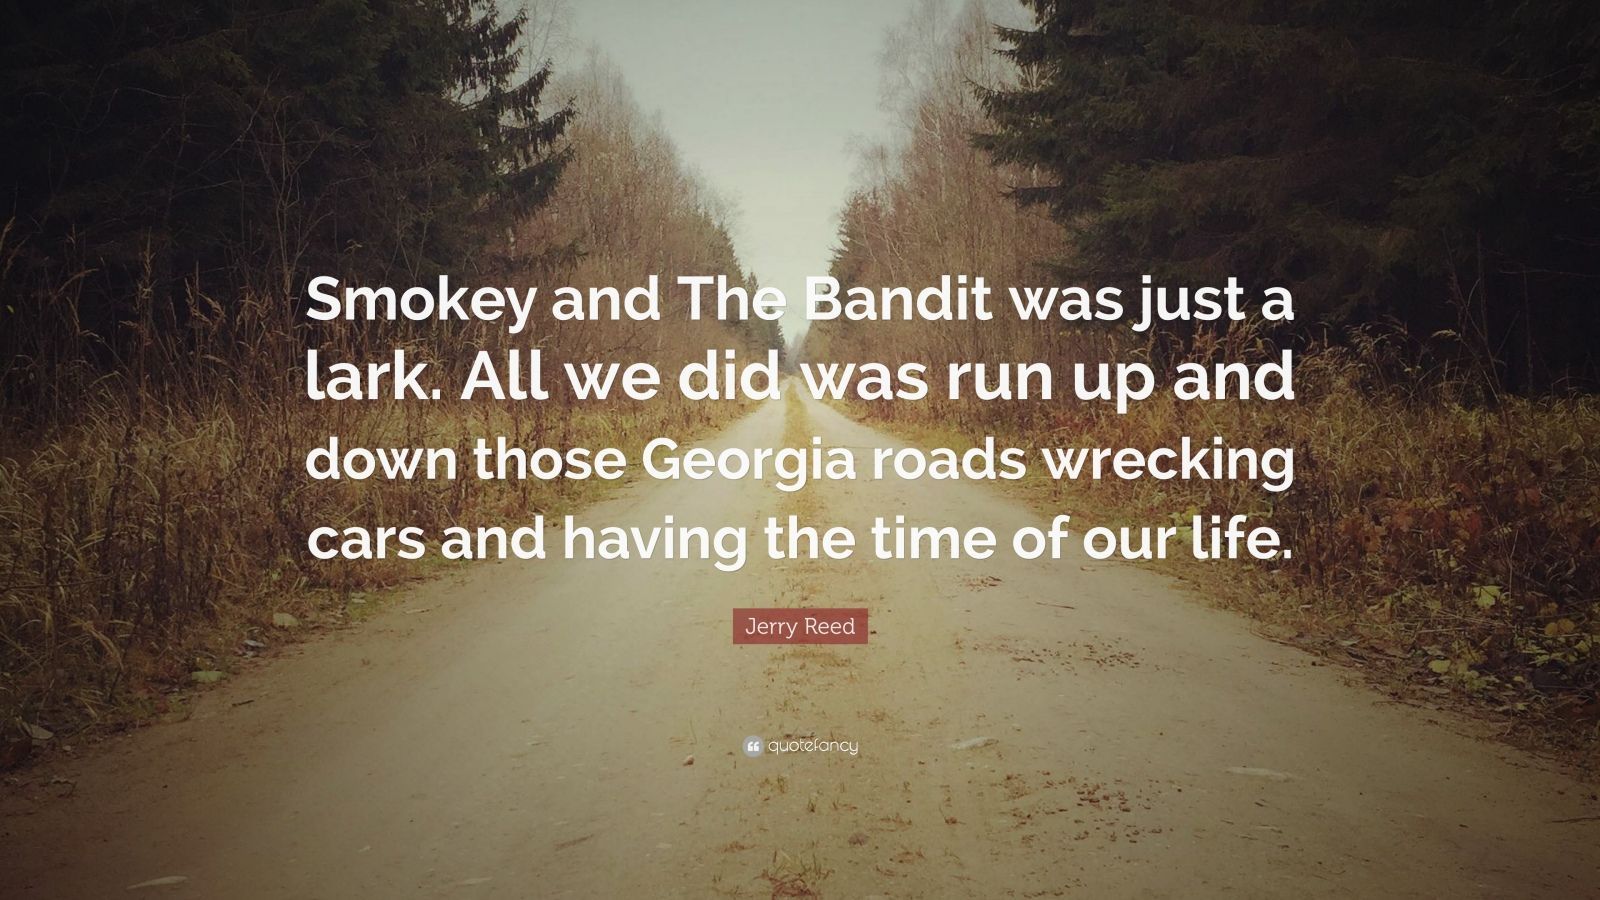 Jerry Reed Quote: “Smokey and The Bandit was just a lark. All we did was run up and down those Georgia roads wrecking cars and having the t.” (7 wallpaper)